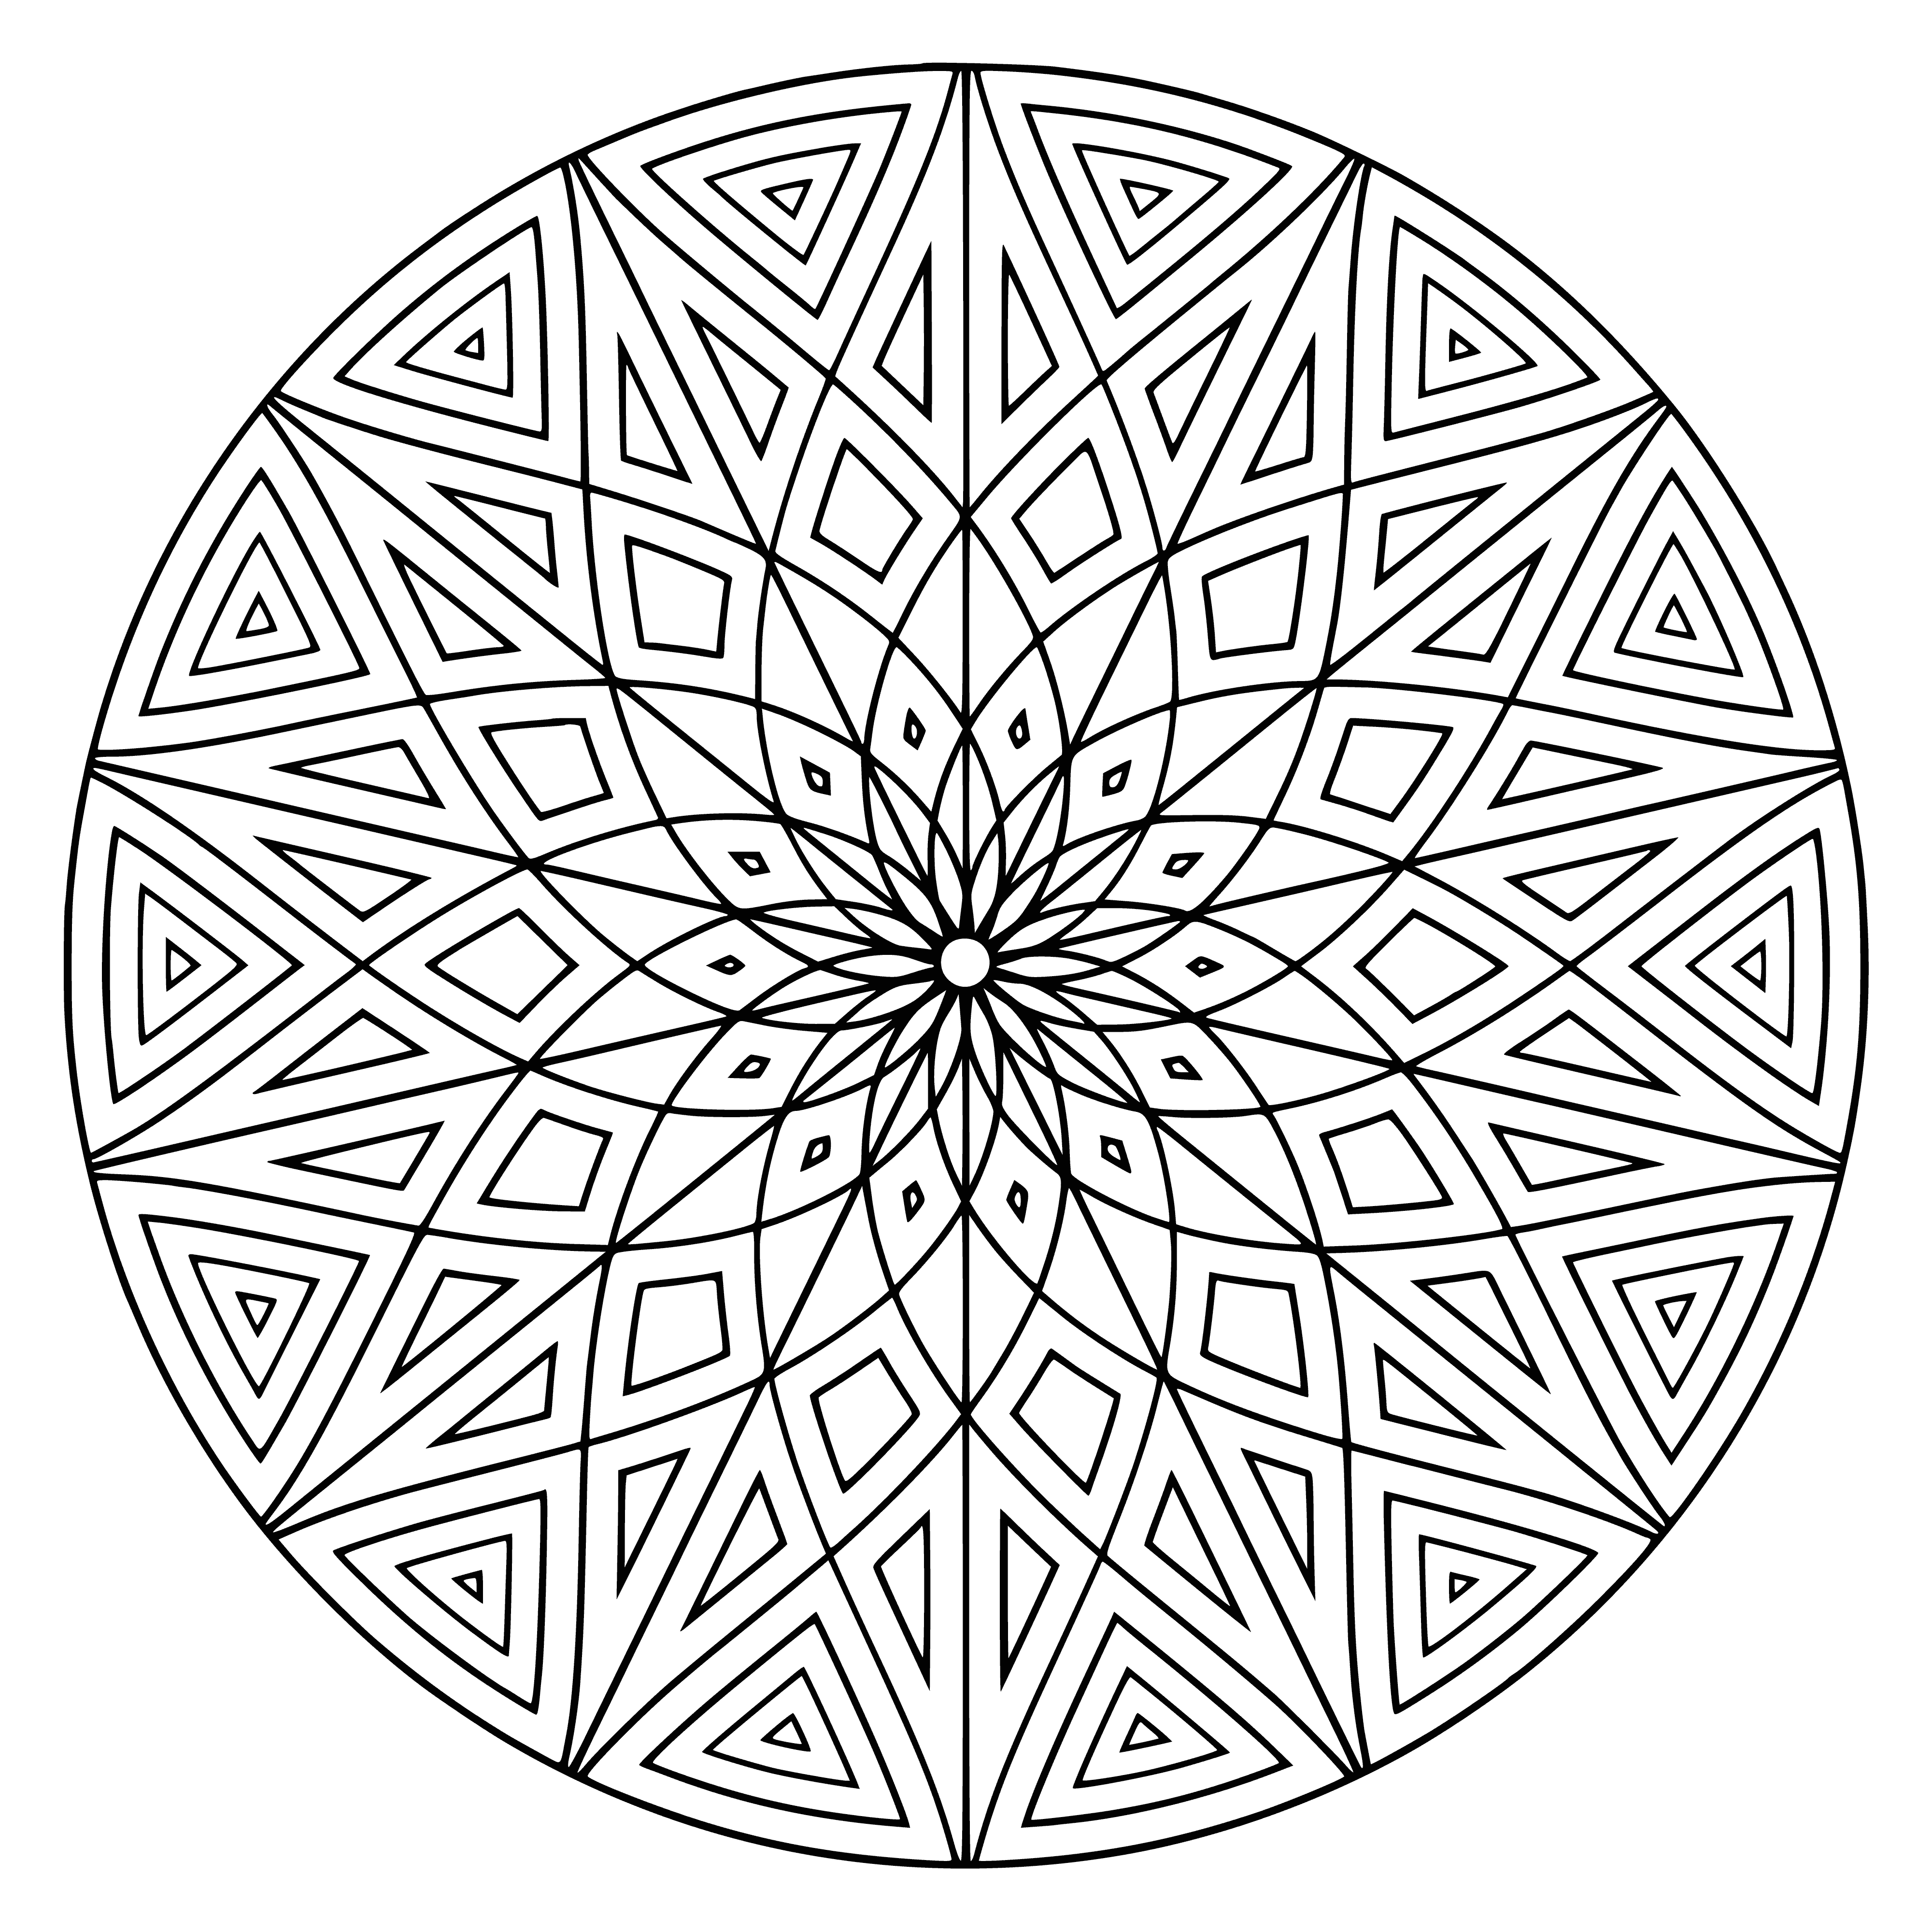 coloring page: This mandala is intricate and detailed, perfect for those who like a challenge and spending time on a project.